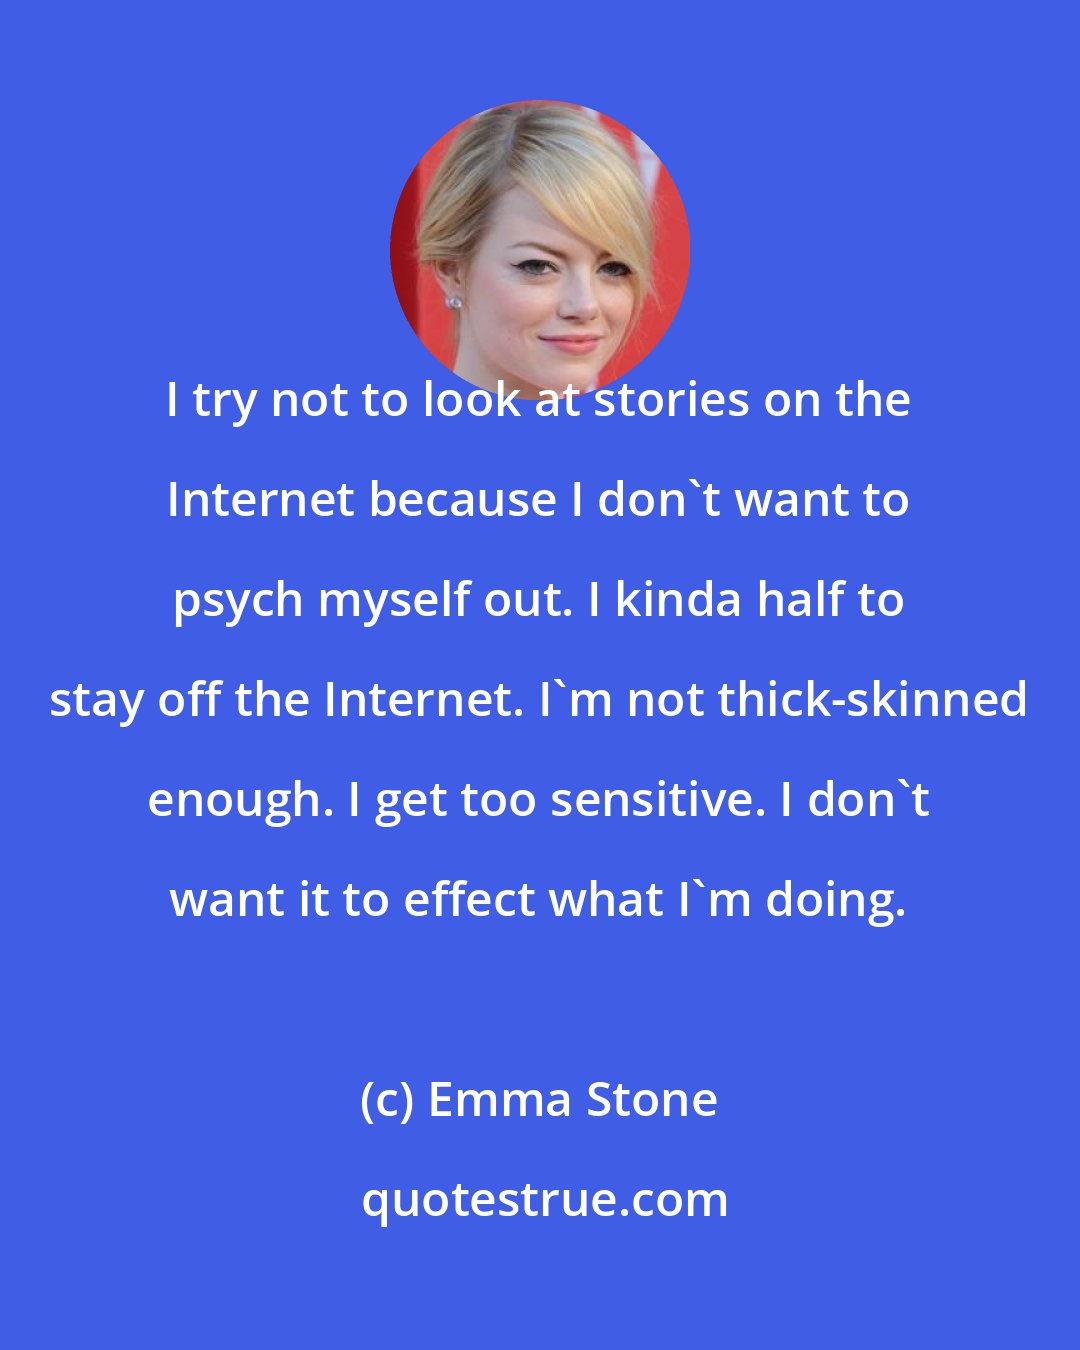 Emma Stone: I try not to look at stories on the Internet because I don't want to psych myself out. I kinda half to stay off the Internet. I'm not thick-skinned enough. I get too sensitive. I don't want it to effect what I'm doing.